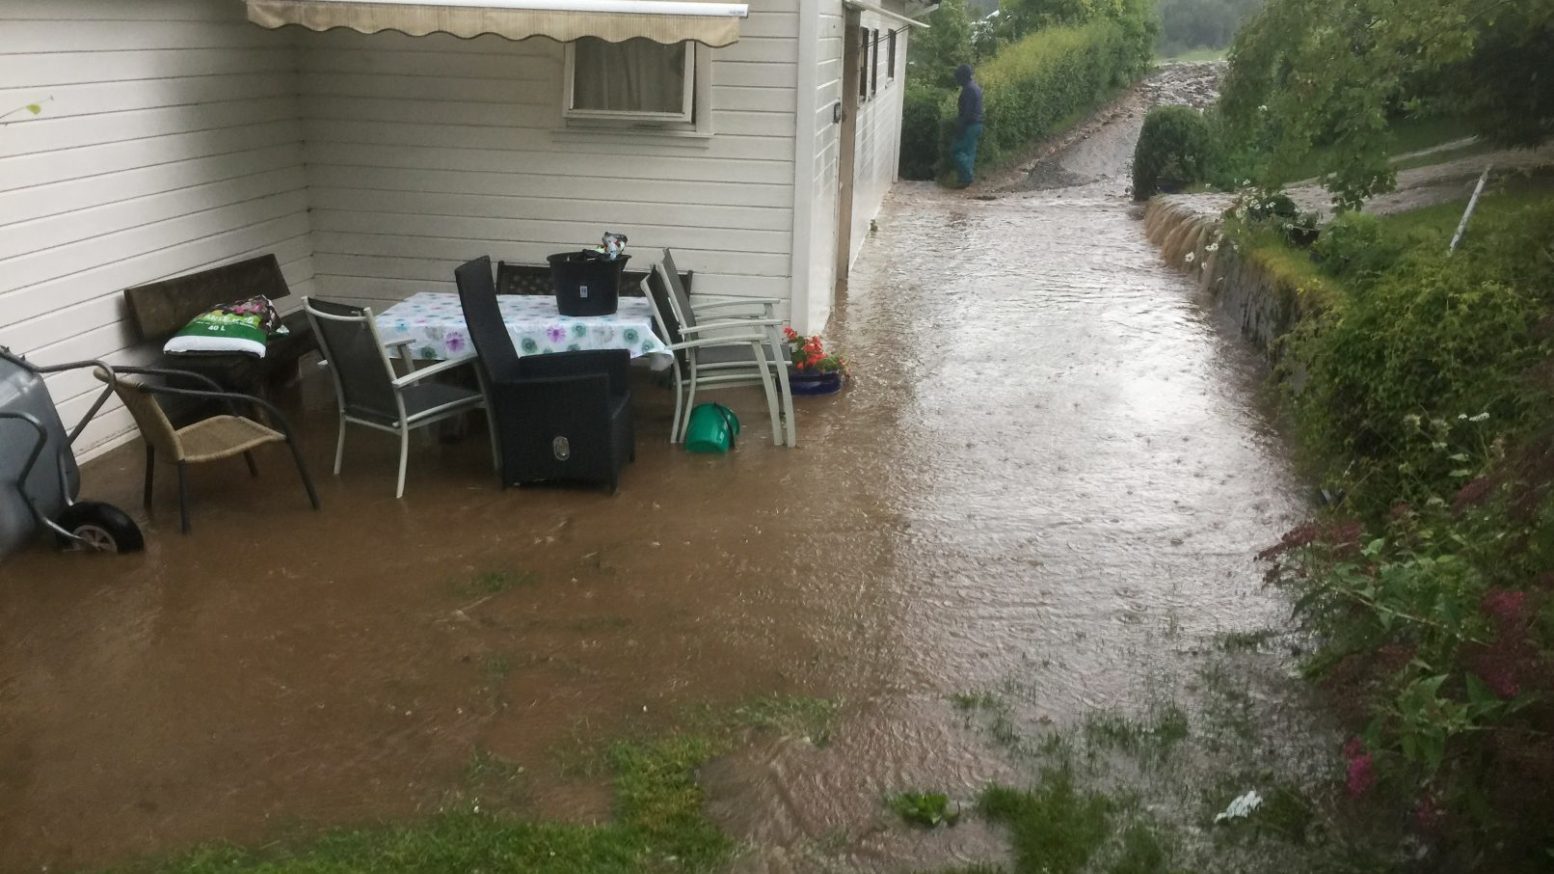 Large rainfall leads to flooding in Reed in Gloppen municipality in Sogn og Fjordane and several other places in southern Norway.